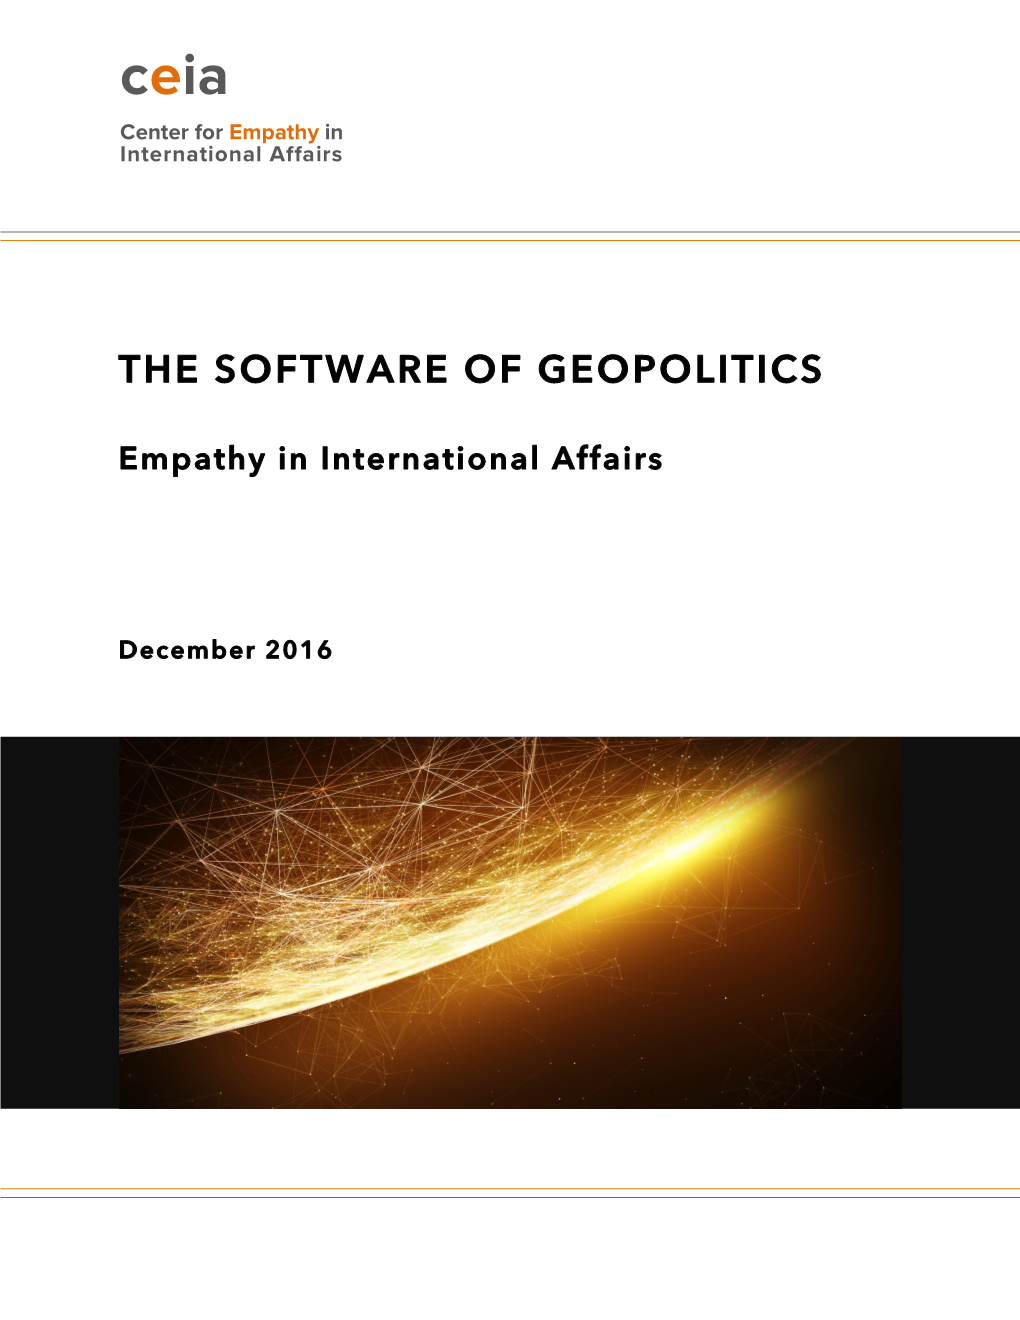 The Software of Geopolitics